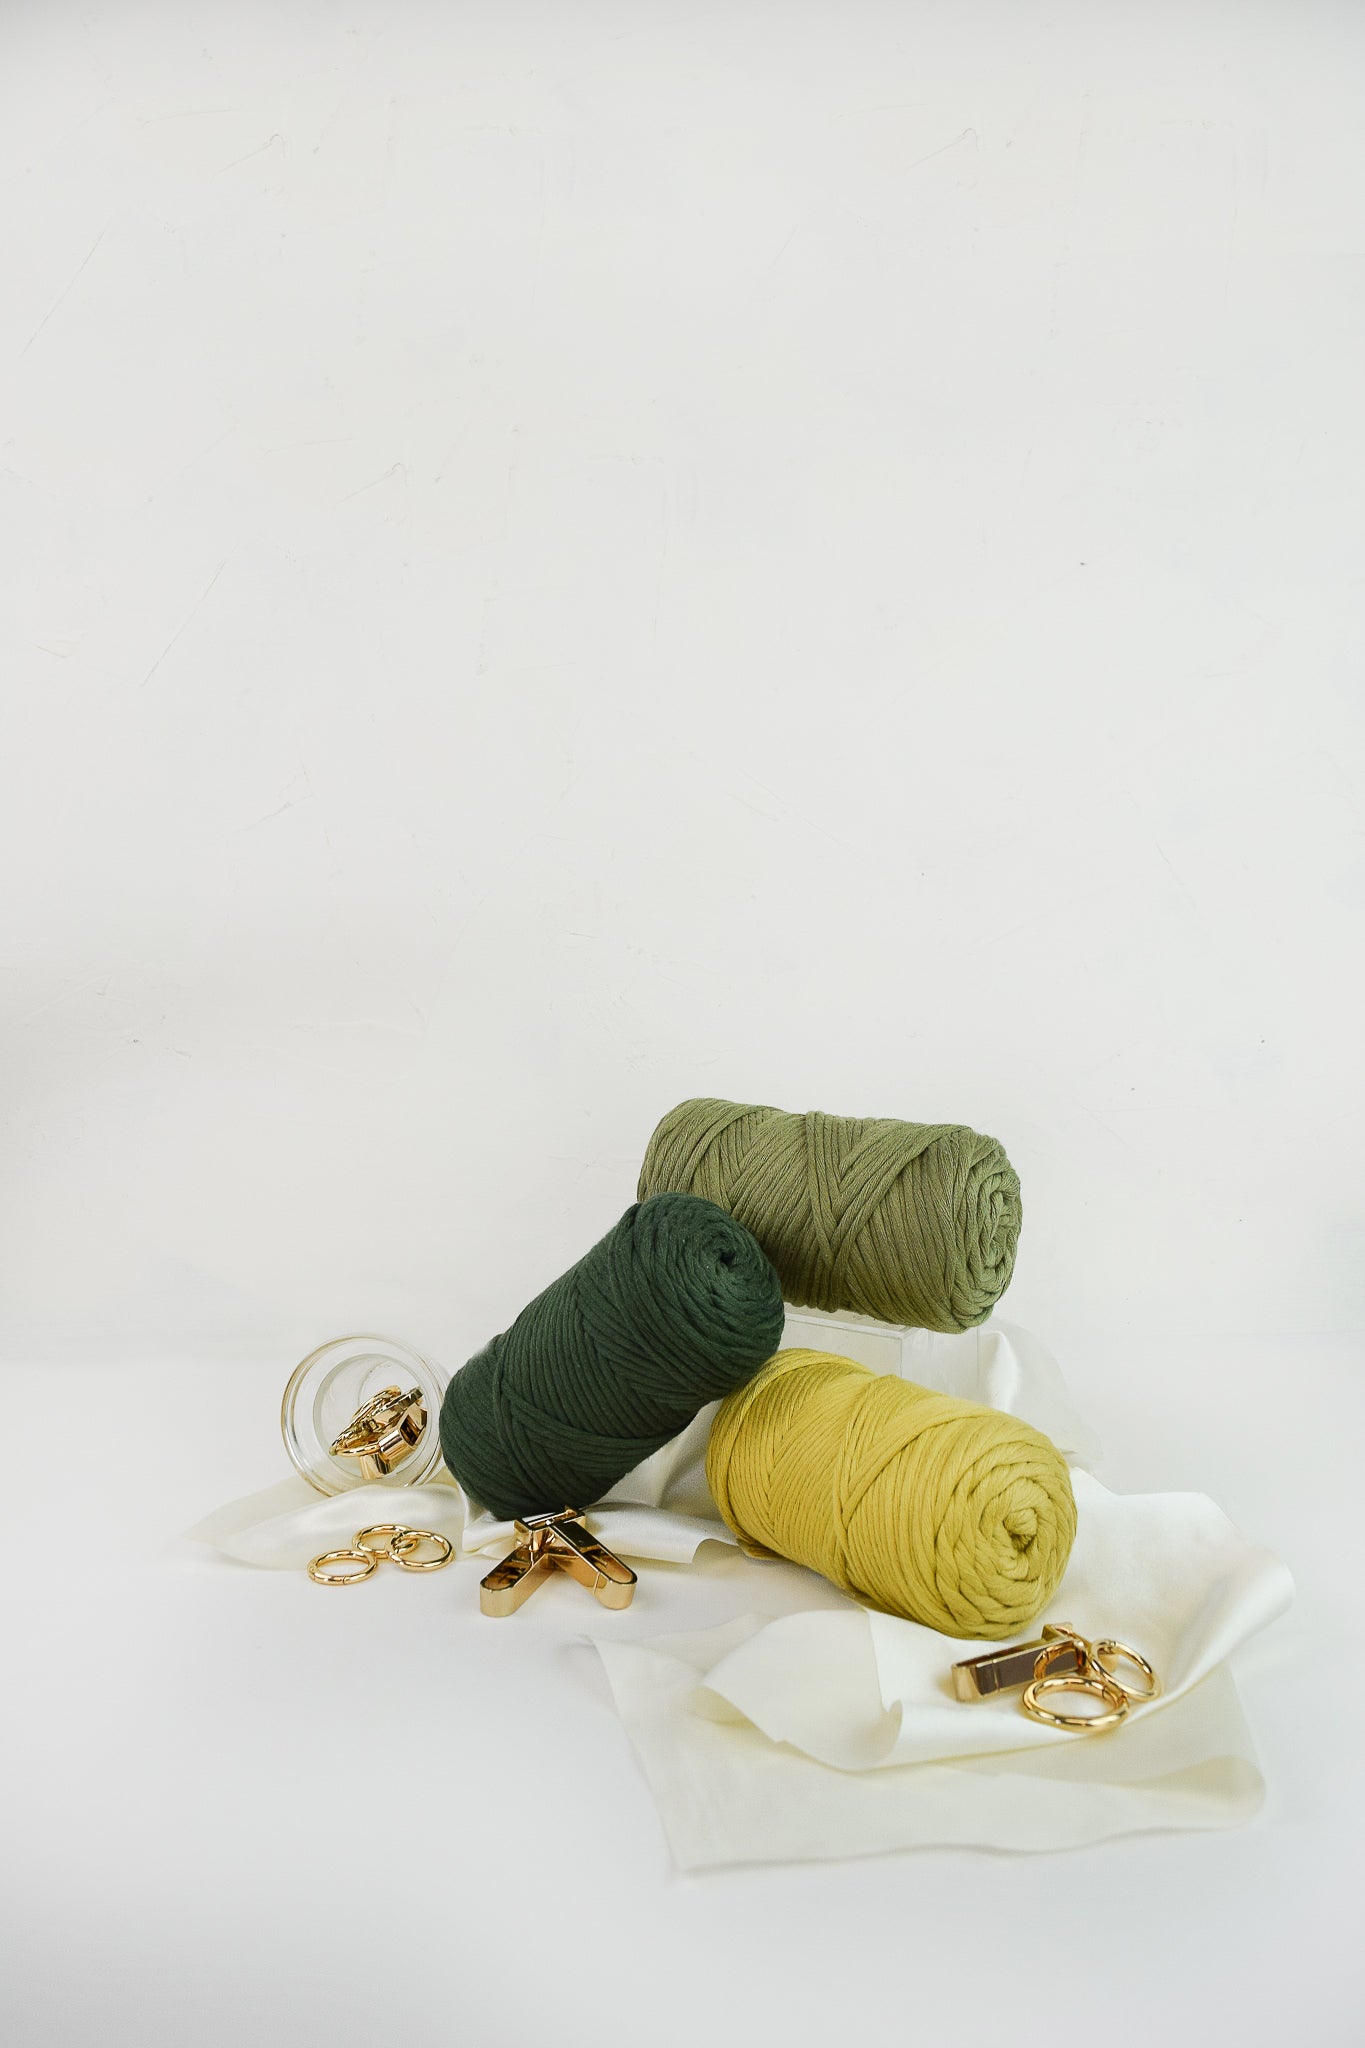 COTTON - VISCOSE ROLL 4 MM - MOSS GREEN COLOR | LIMITED EDITION